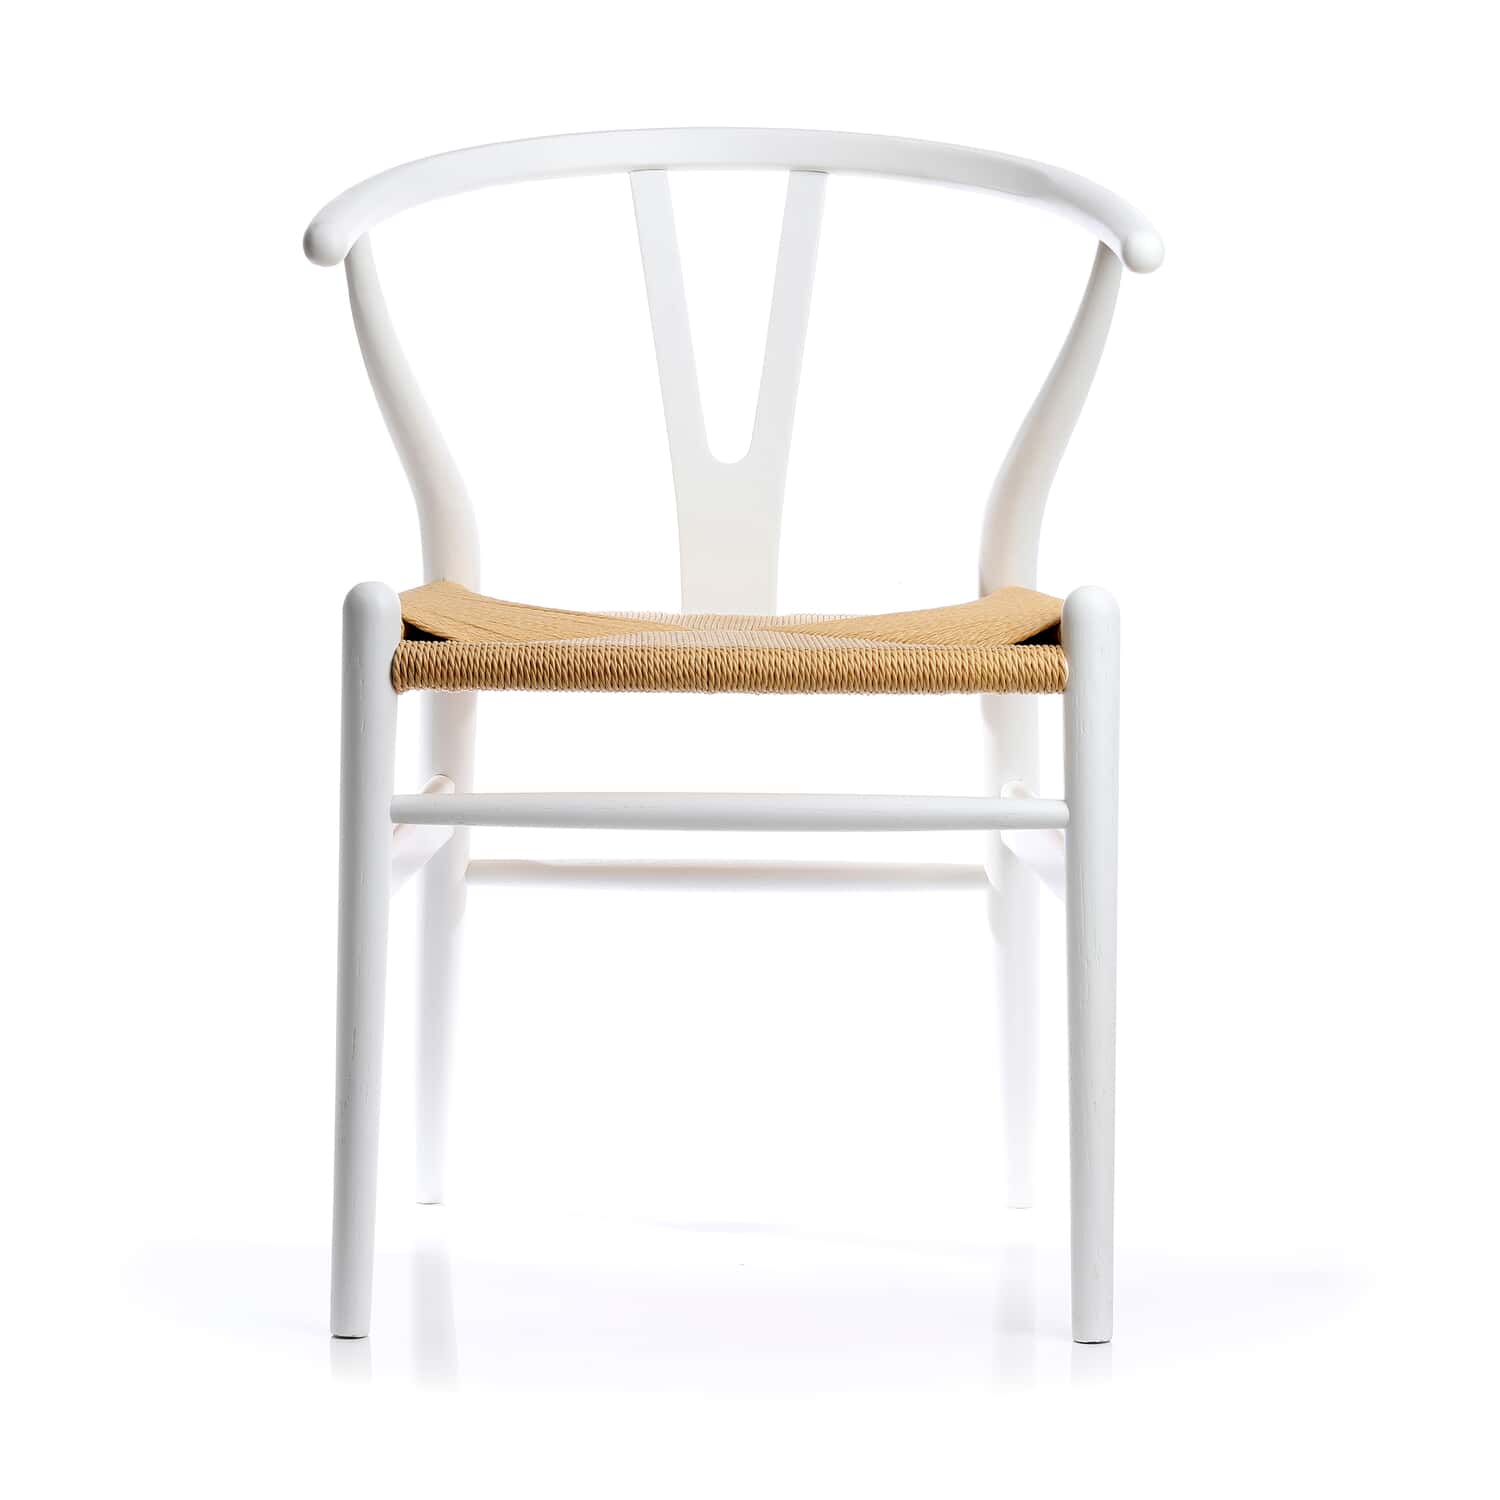 Hans Wegner Replica Wishbone Chair In Oak Stained White Open Pore And Natural Cord Swivel Uk